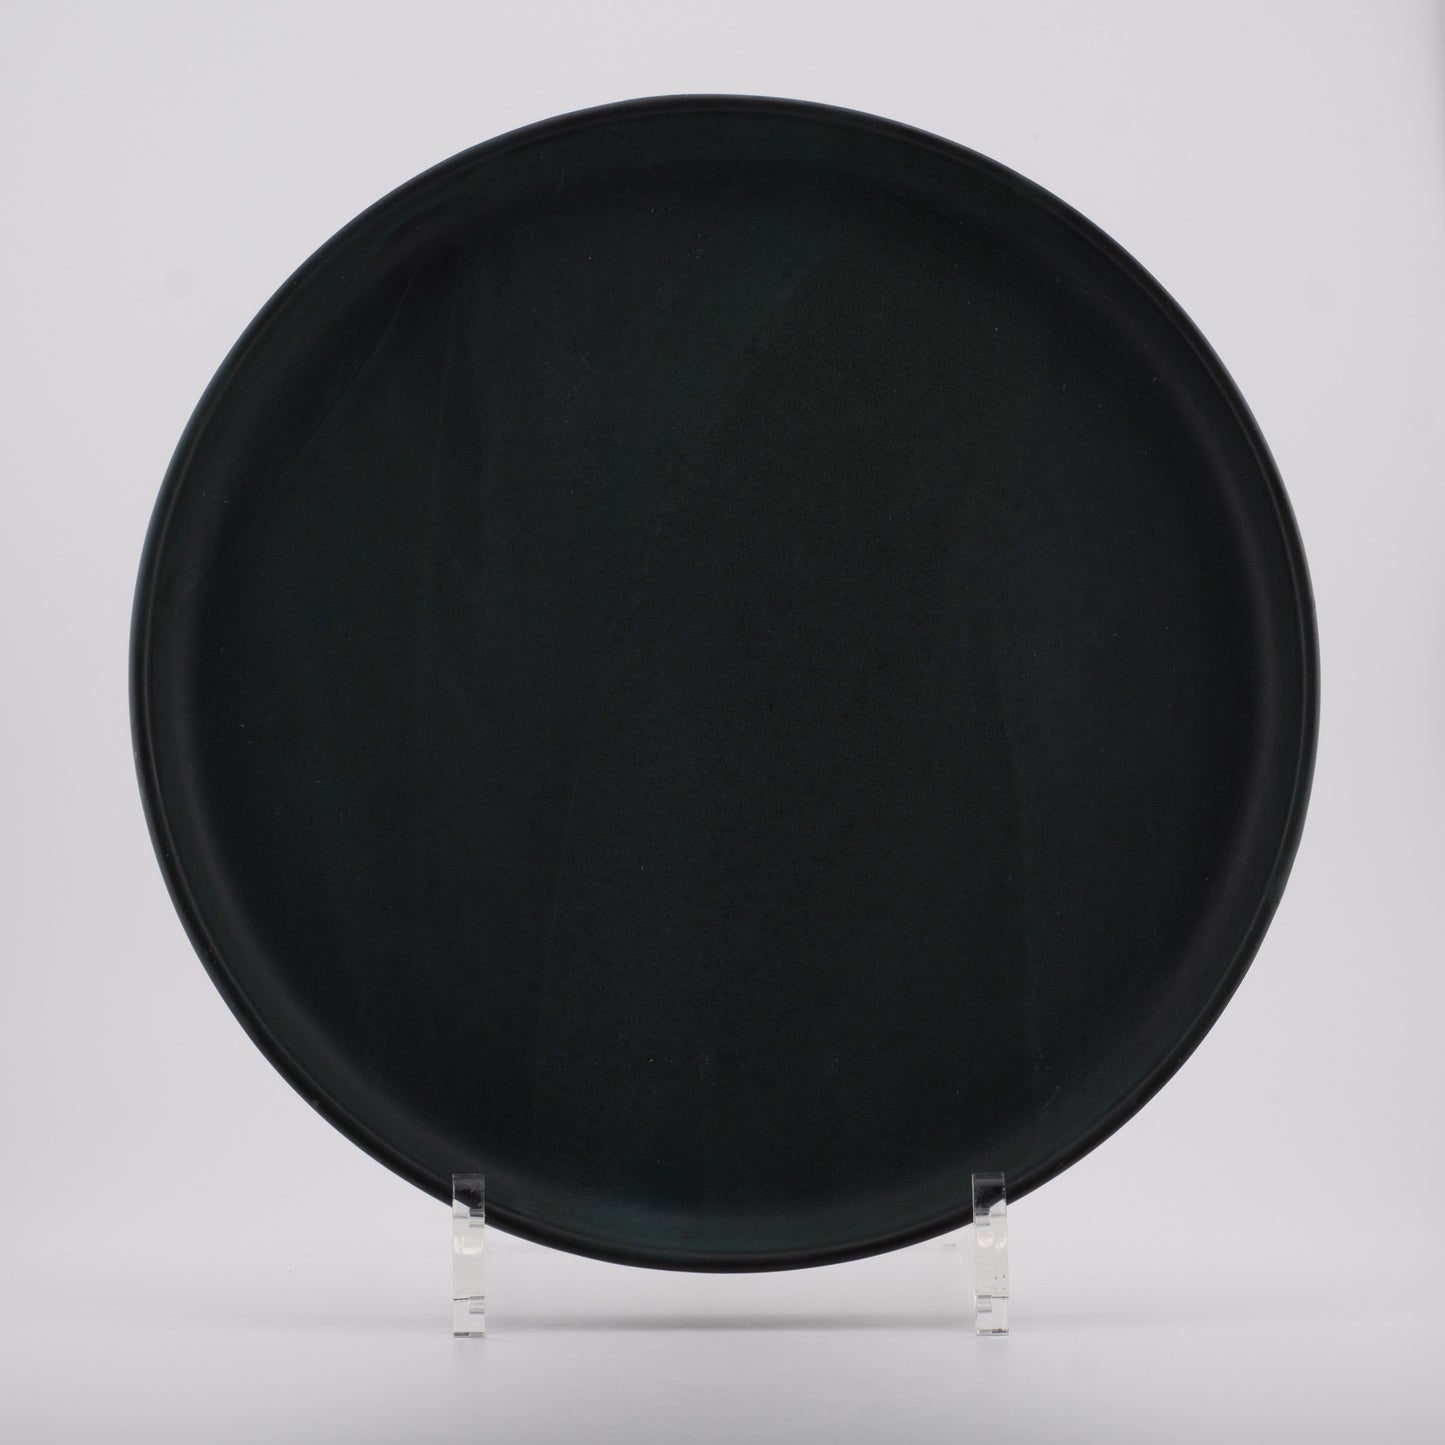 Midnight black plates and bowls